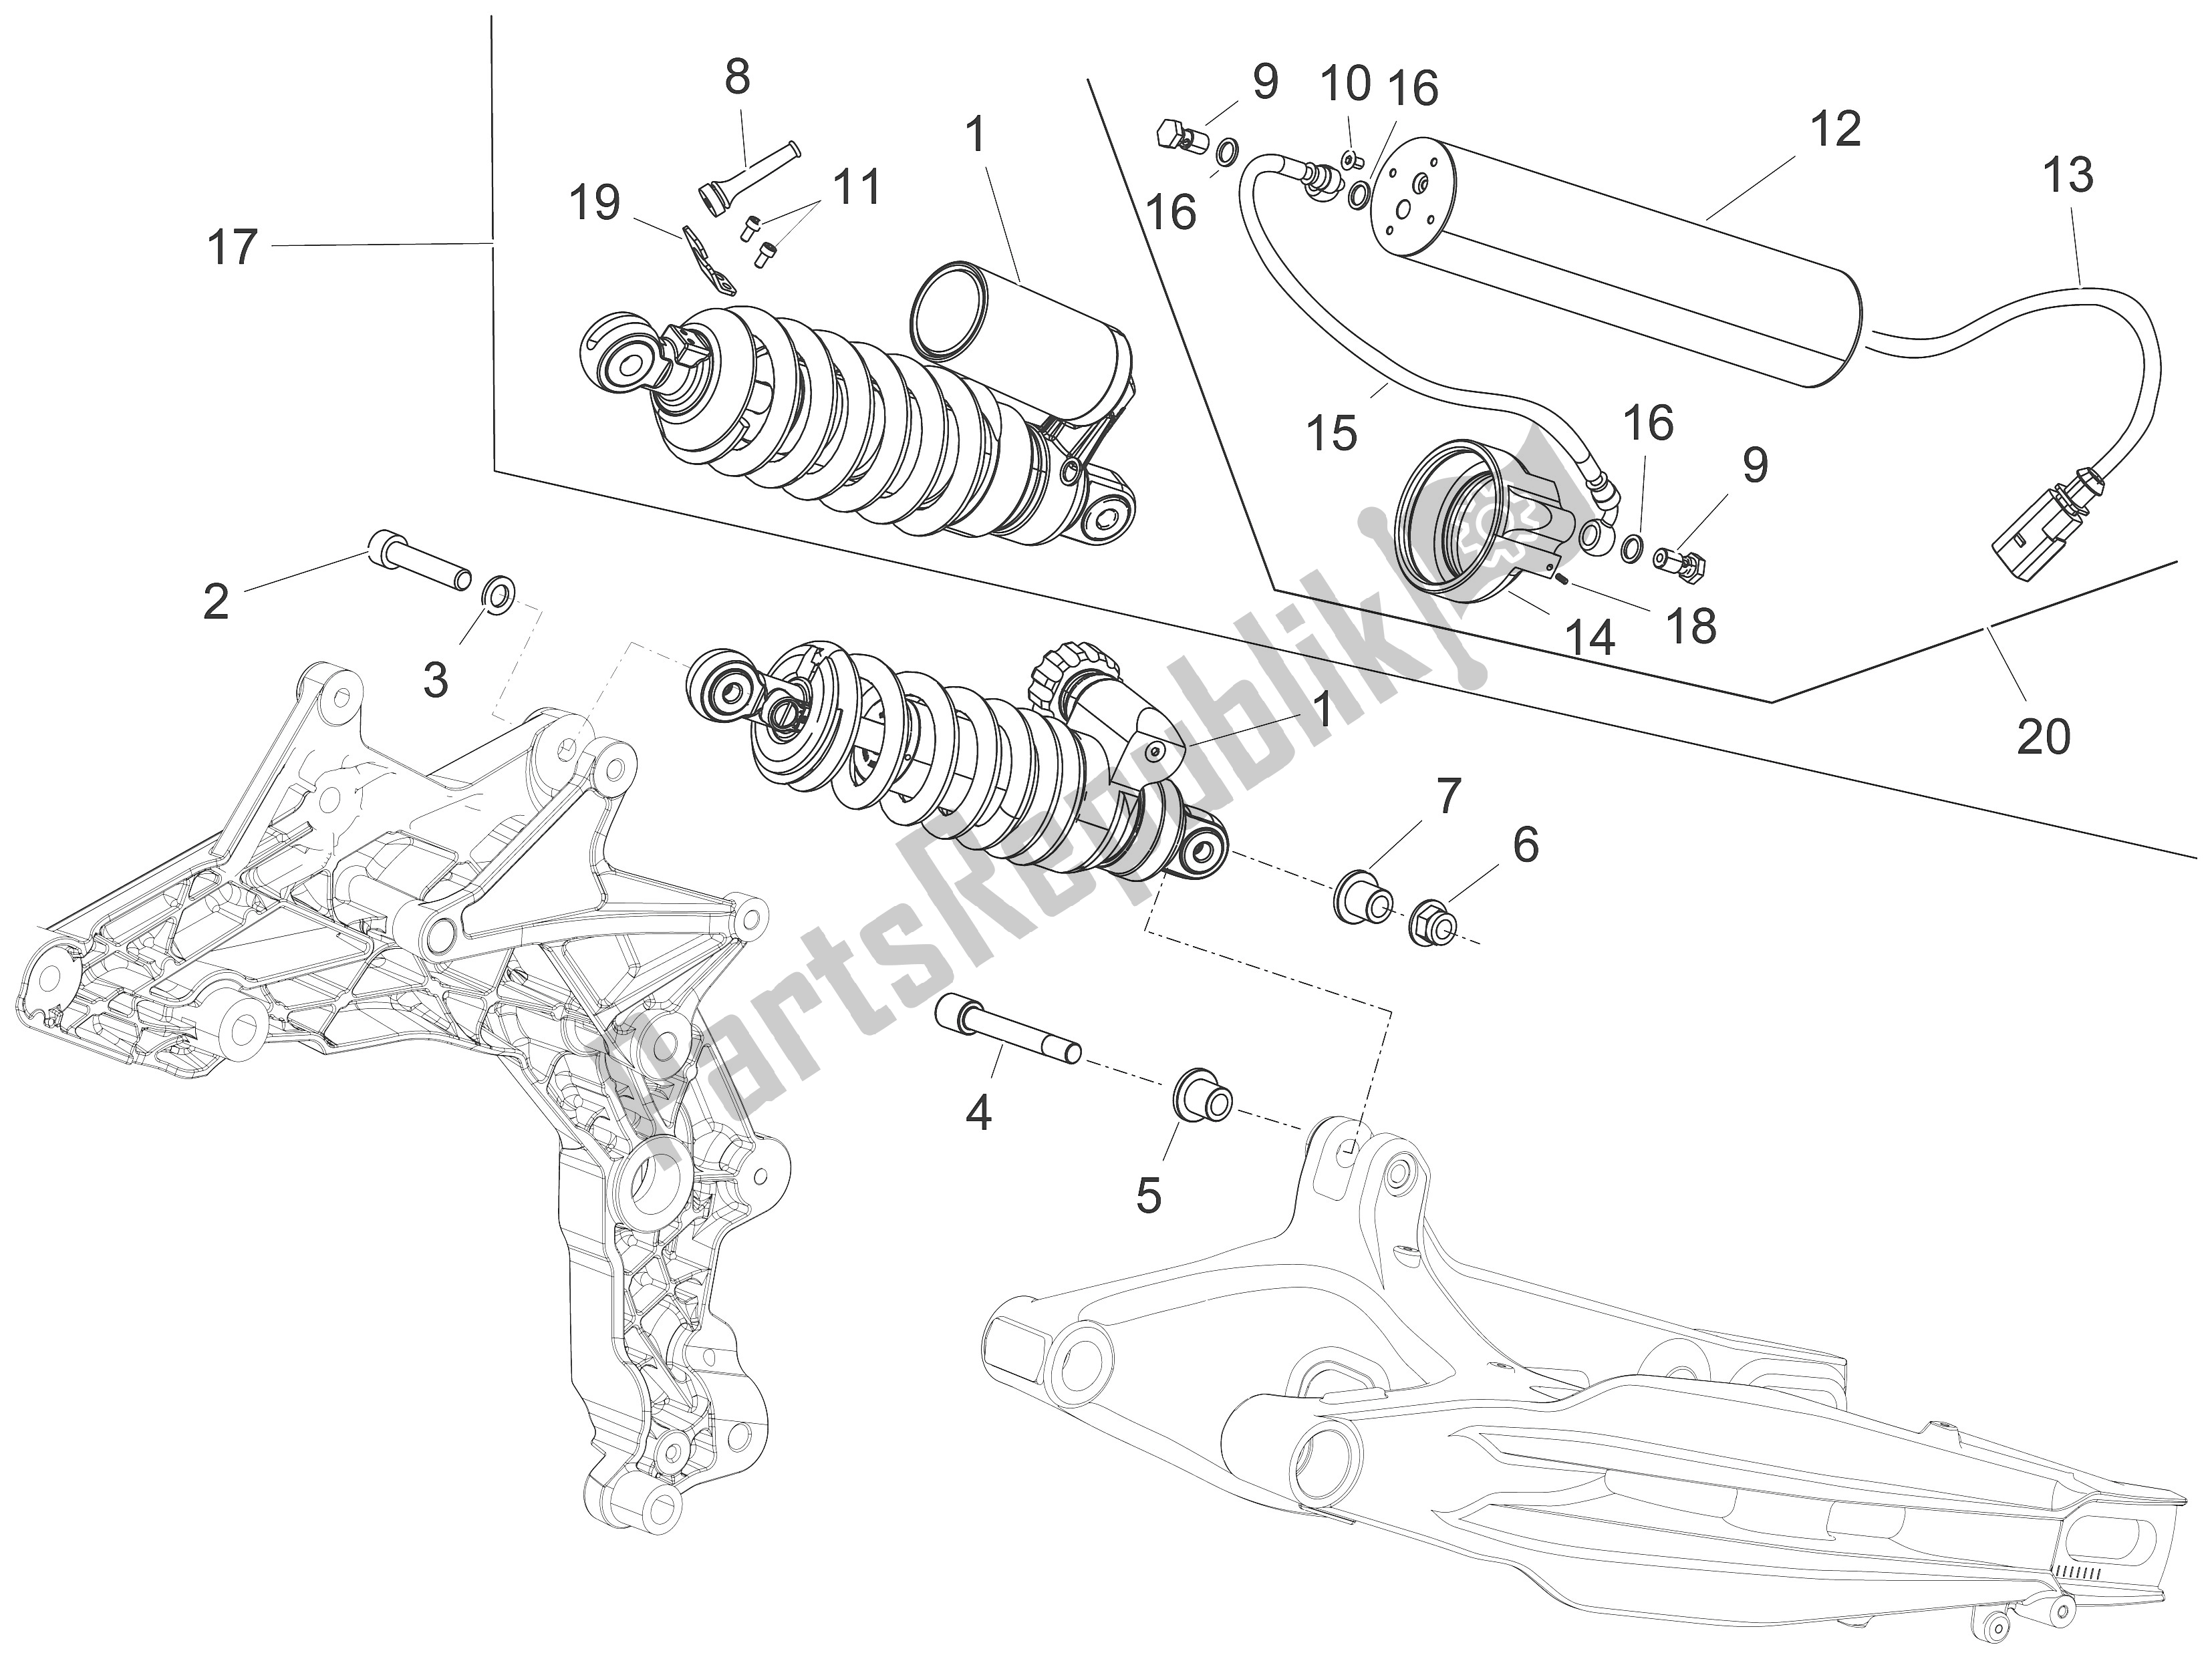 All parts for the Shock Absorber of the Aprilia Caponord 1200 USA 2015